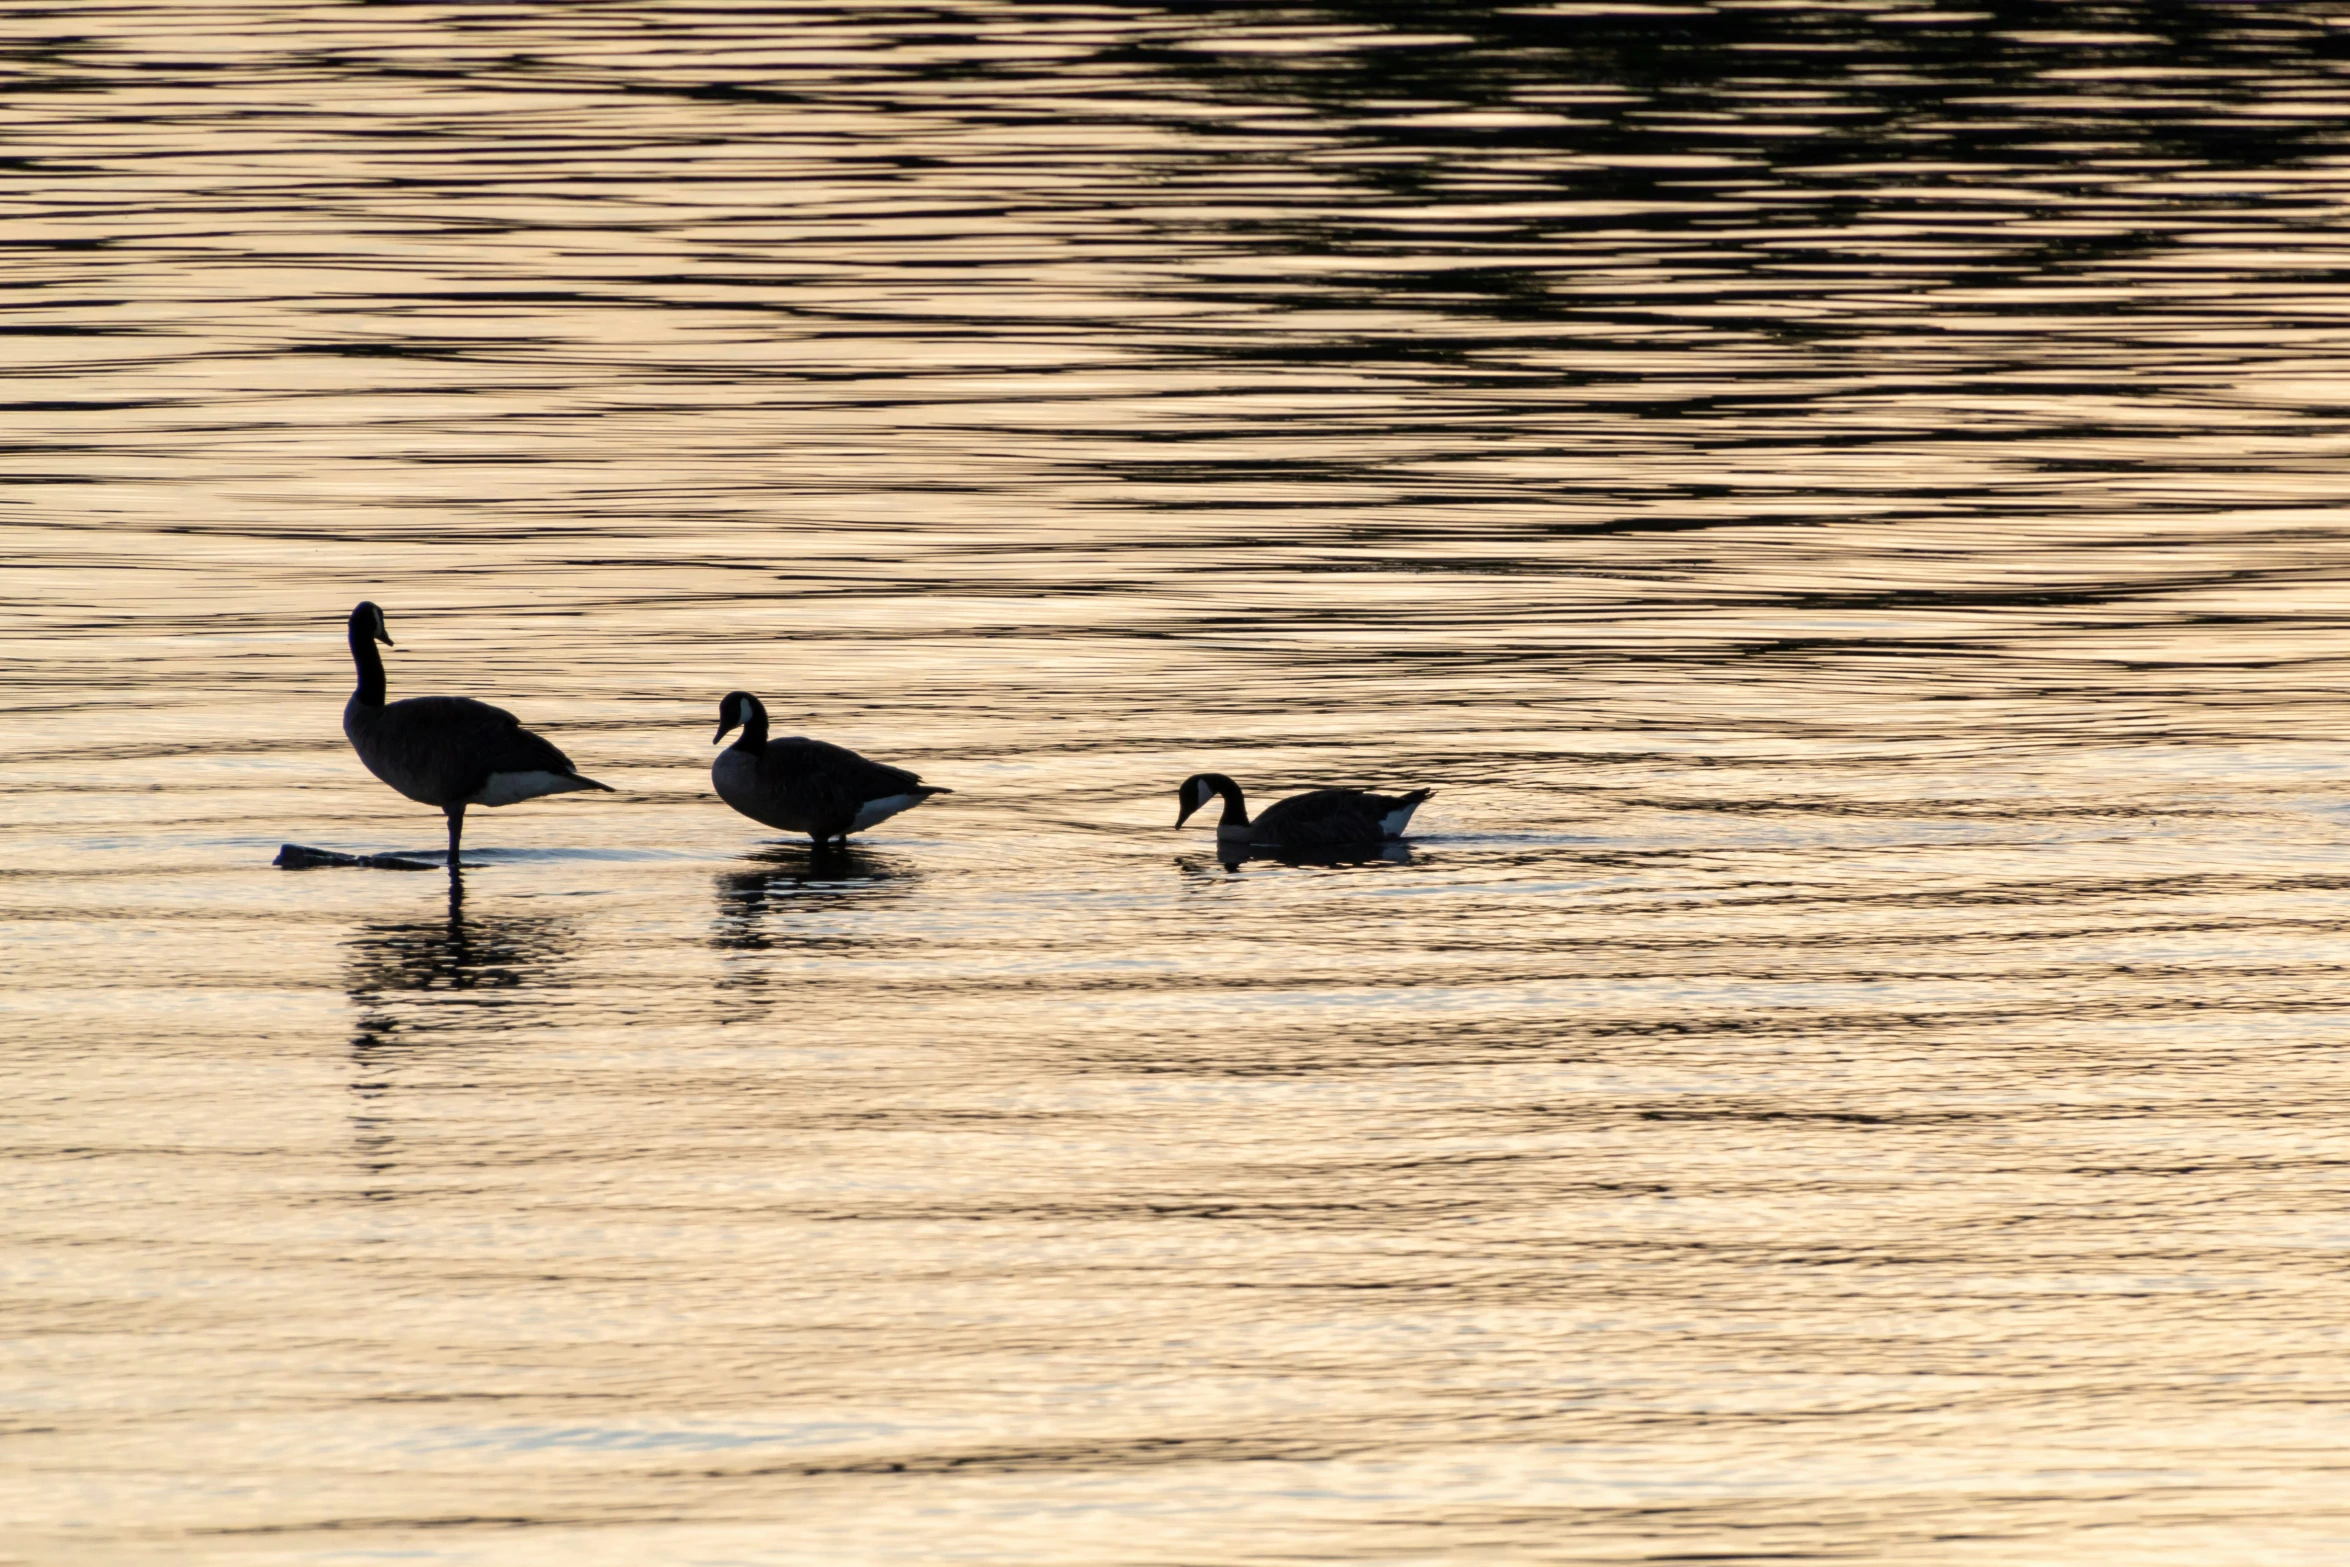 three geese swimming in a large body of water